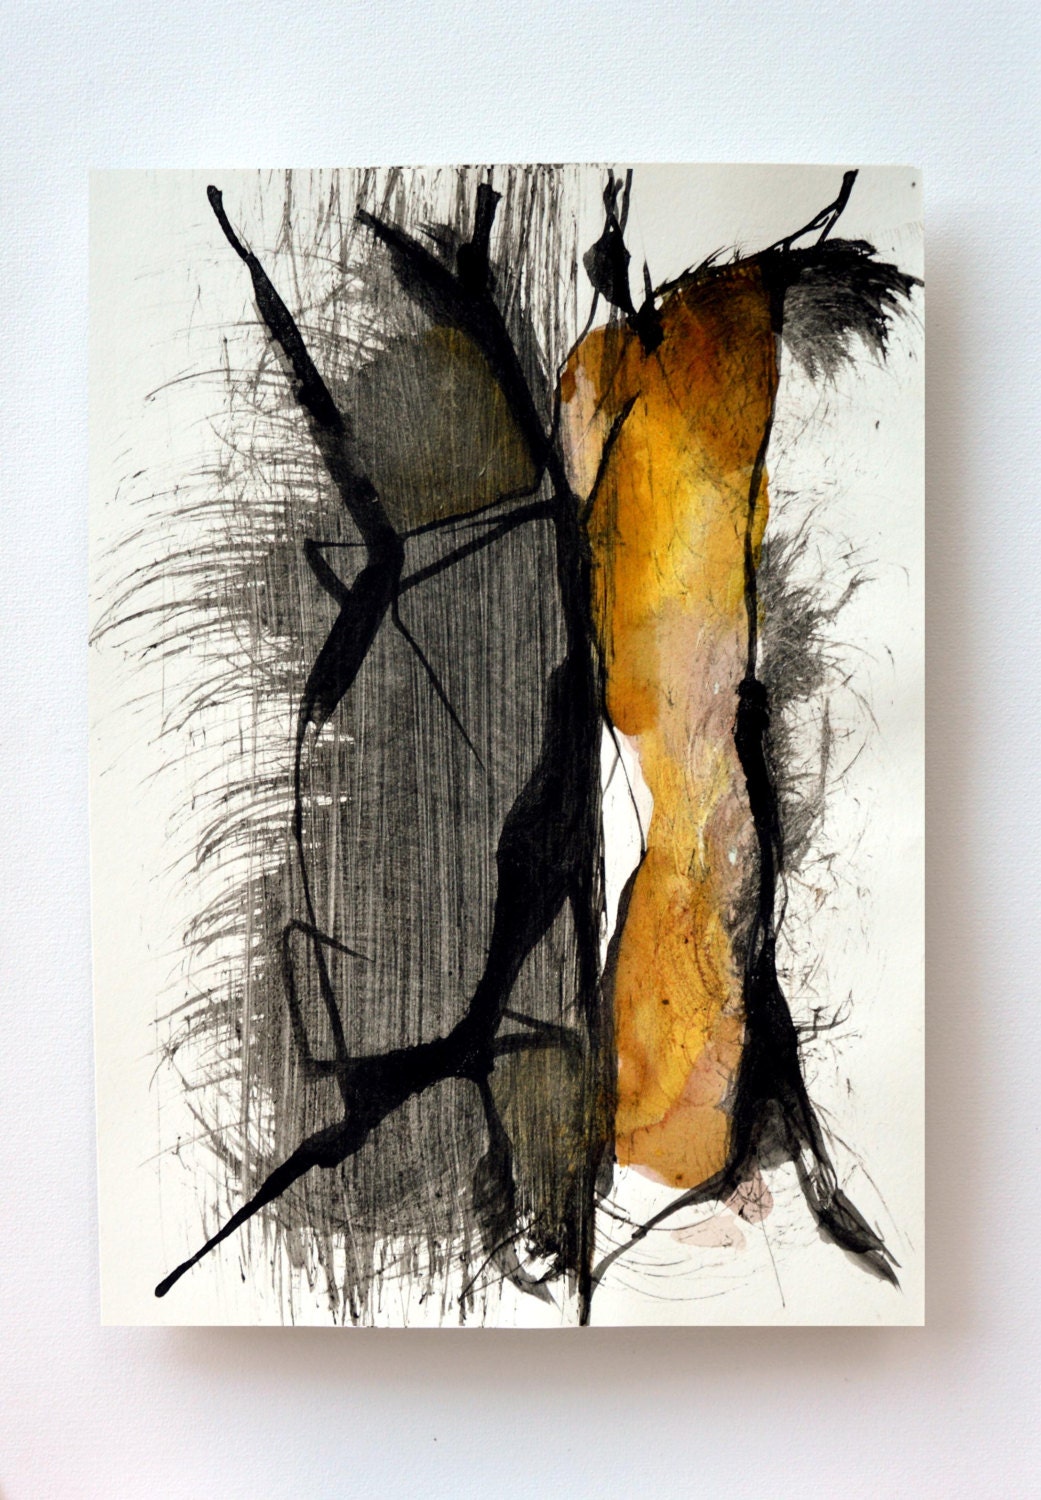 Original abstract art ink drawing - Constant transformation-black, brown, beige, yellow & white,modern art, contemporany art - ComArt